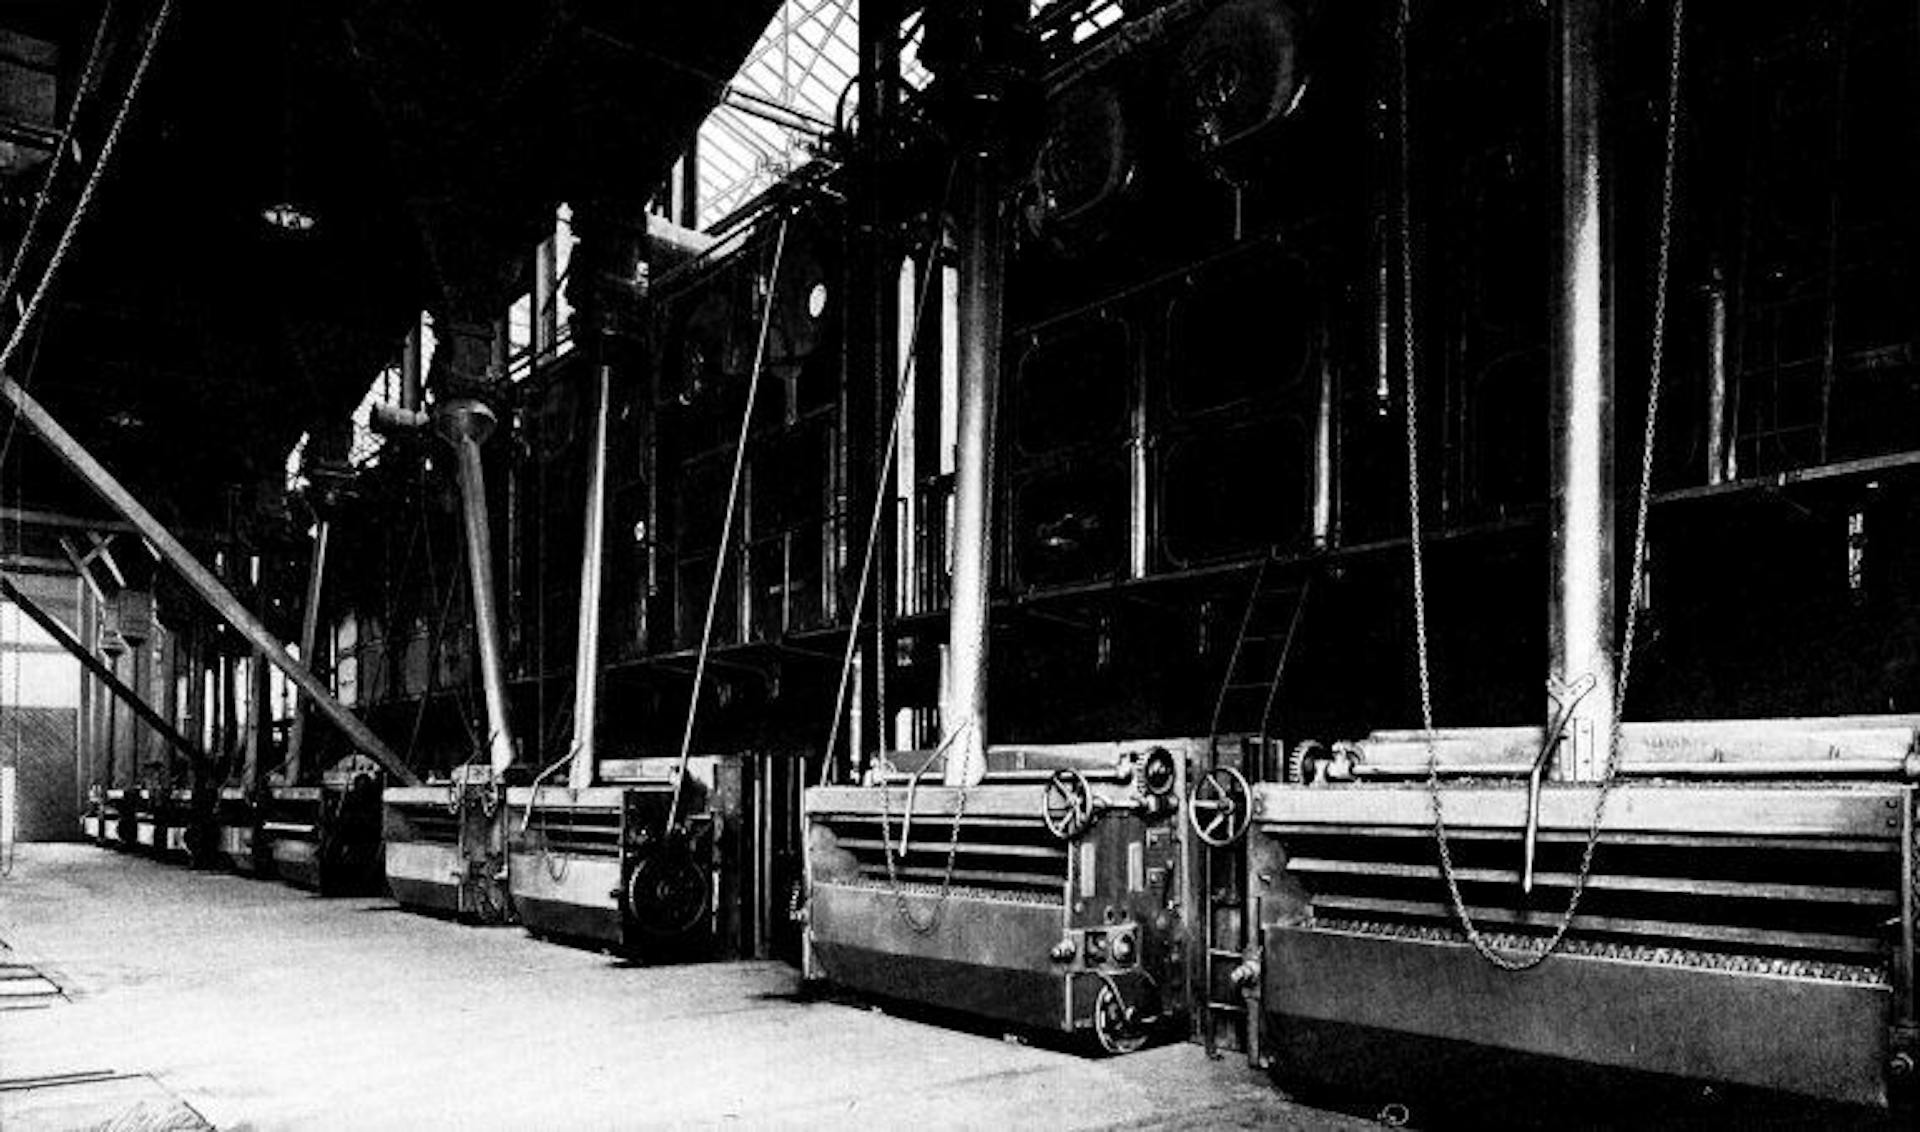 Portion of 9600 Horse-power Installation of Babcock & Wilcox Boilers and Superheaters, Equipped with Babcock & Wilcox Chain Grate Stokers at the Blue Island, Ill., Plant of the Public Service Co. of Northern Illinois. This Company Operates 14,580 Horse Power of Babcock & Wilcox Boilers and Superheaters in its Various Stations